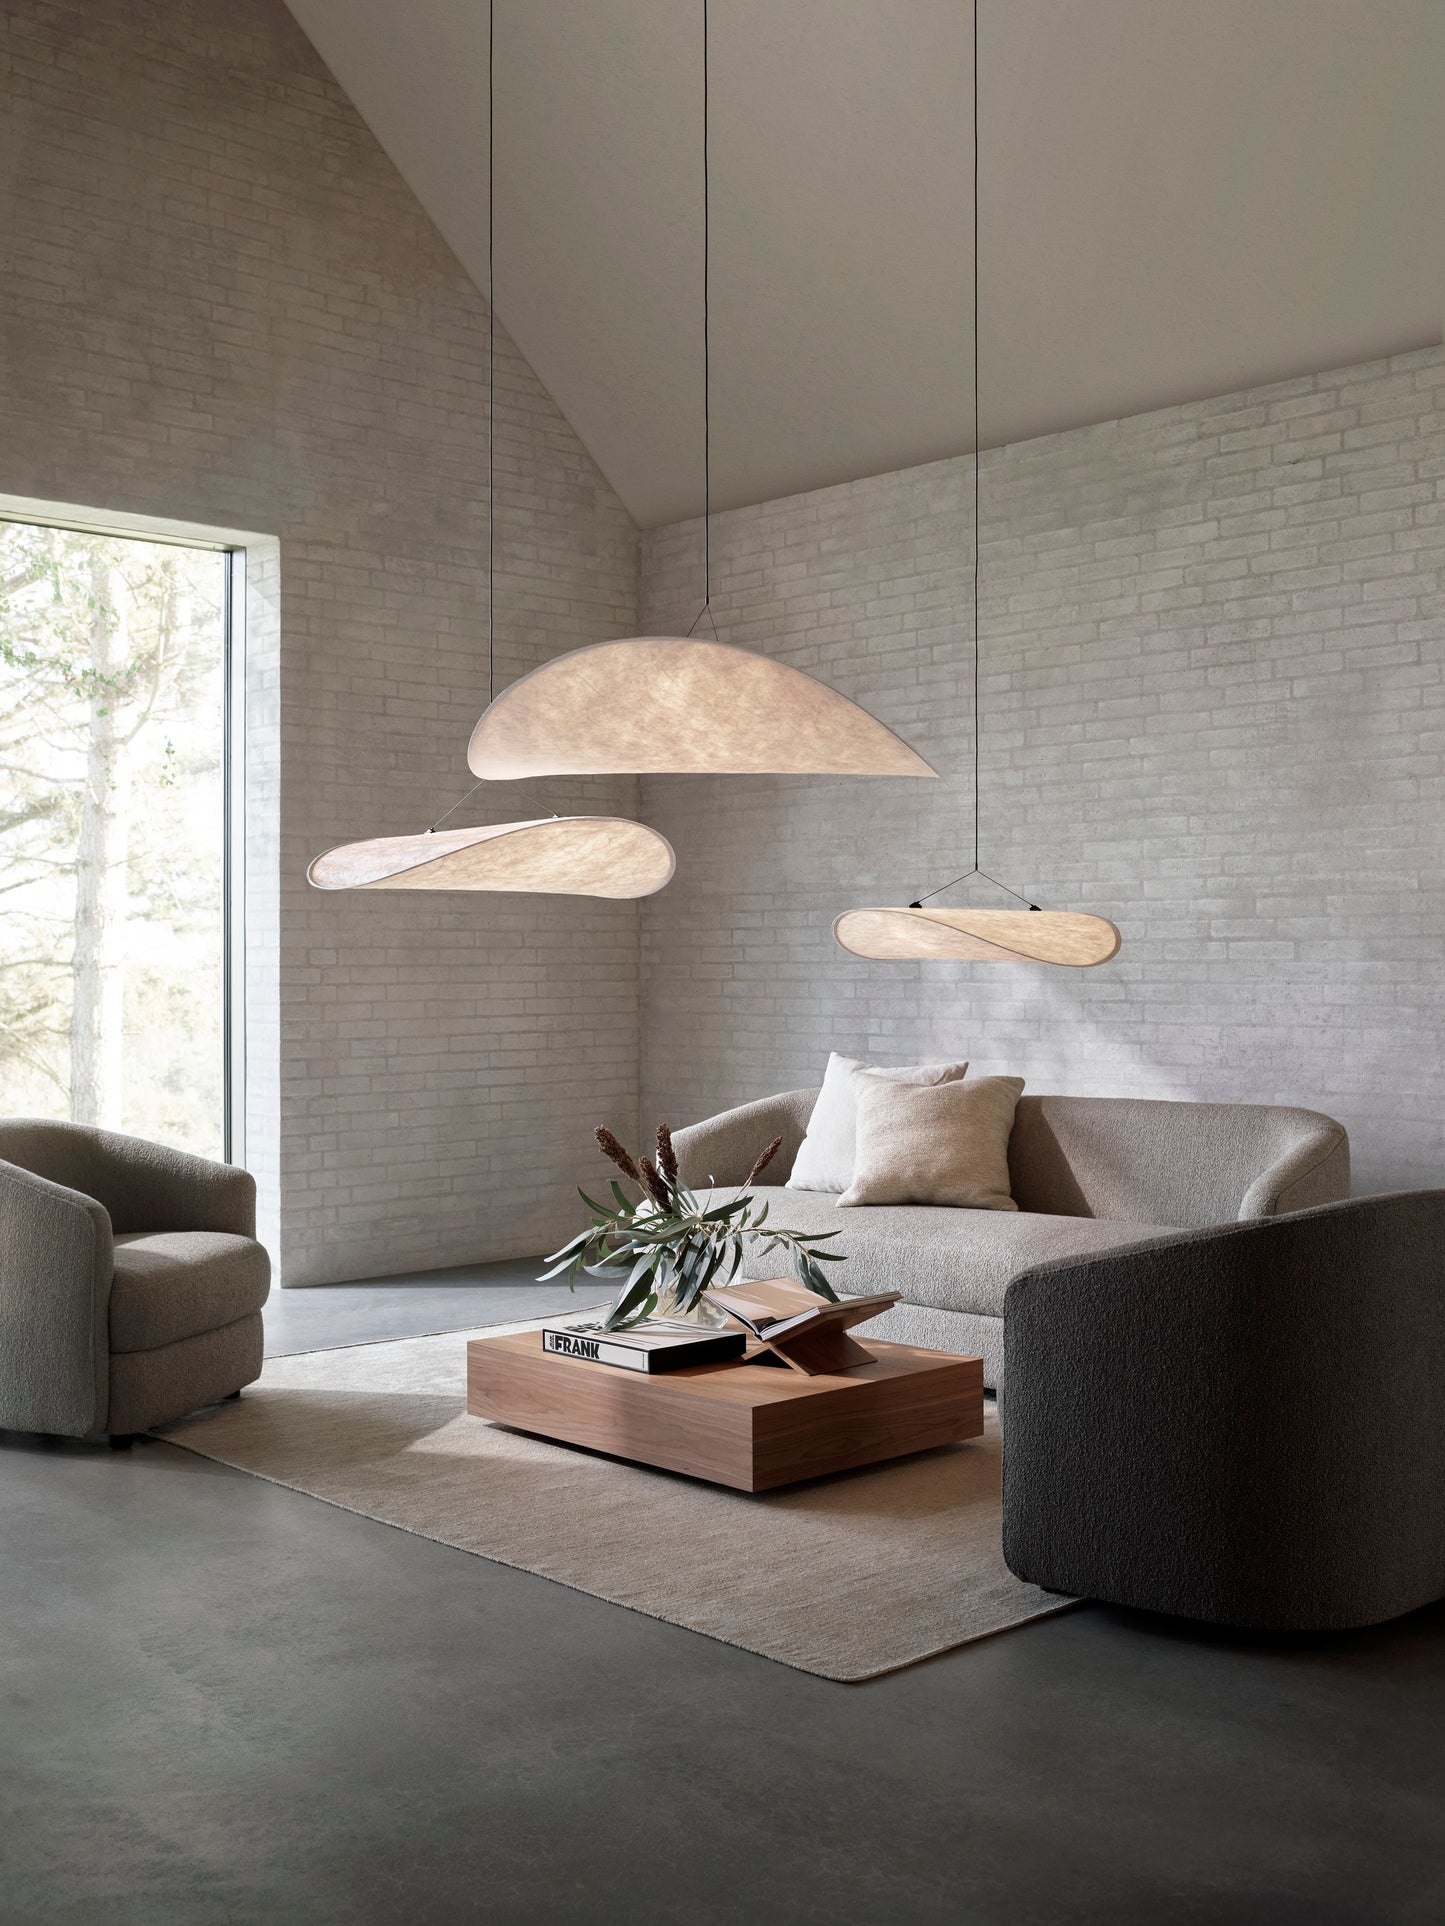 Tense Pendant Lamps by New Works hanging in modern design interior living room with Covent Sofa and Chairs.